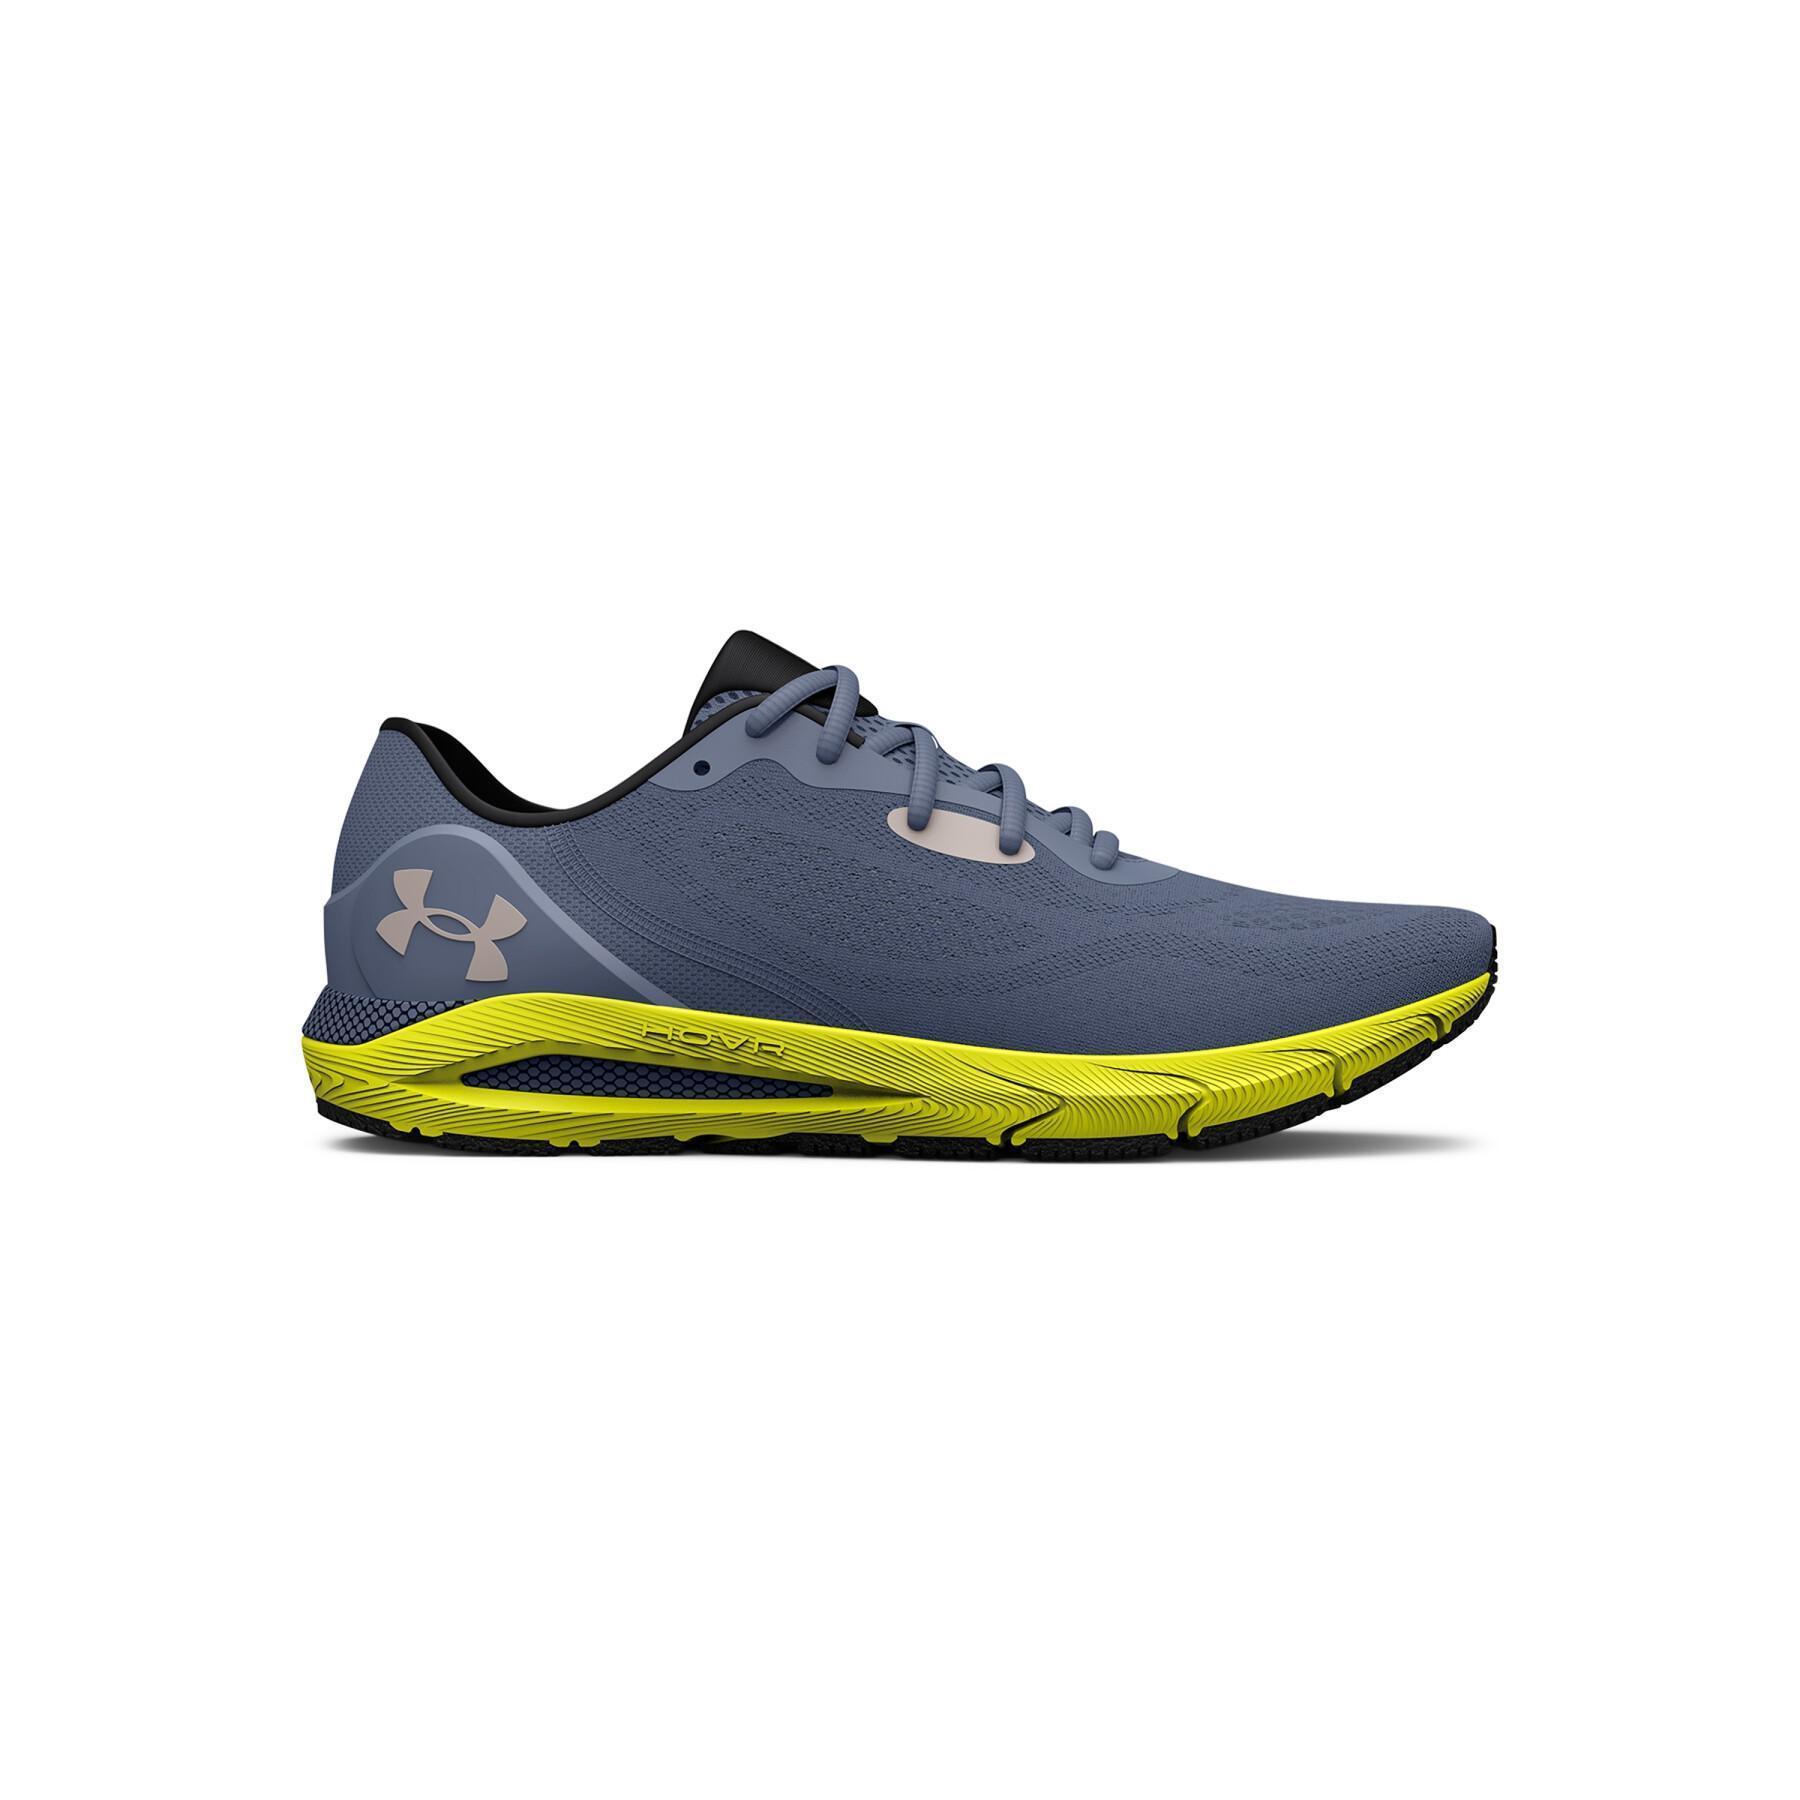 Chaussures de running Under Armour Hovr sonic 5